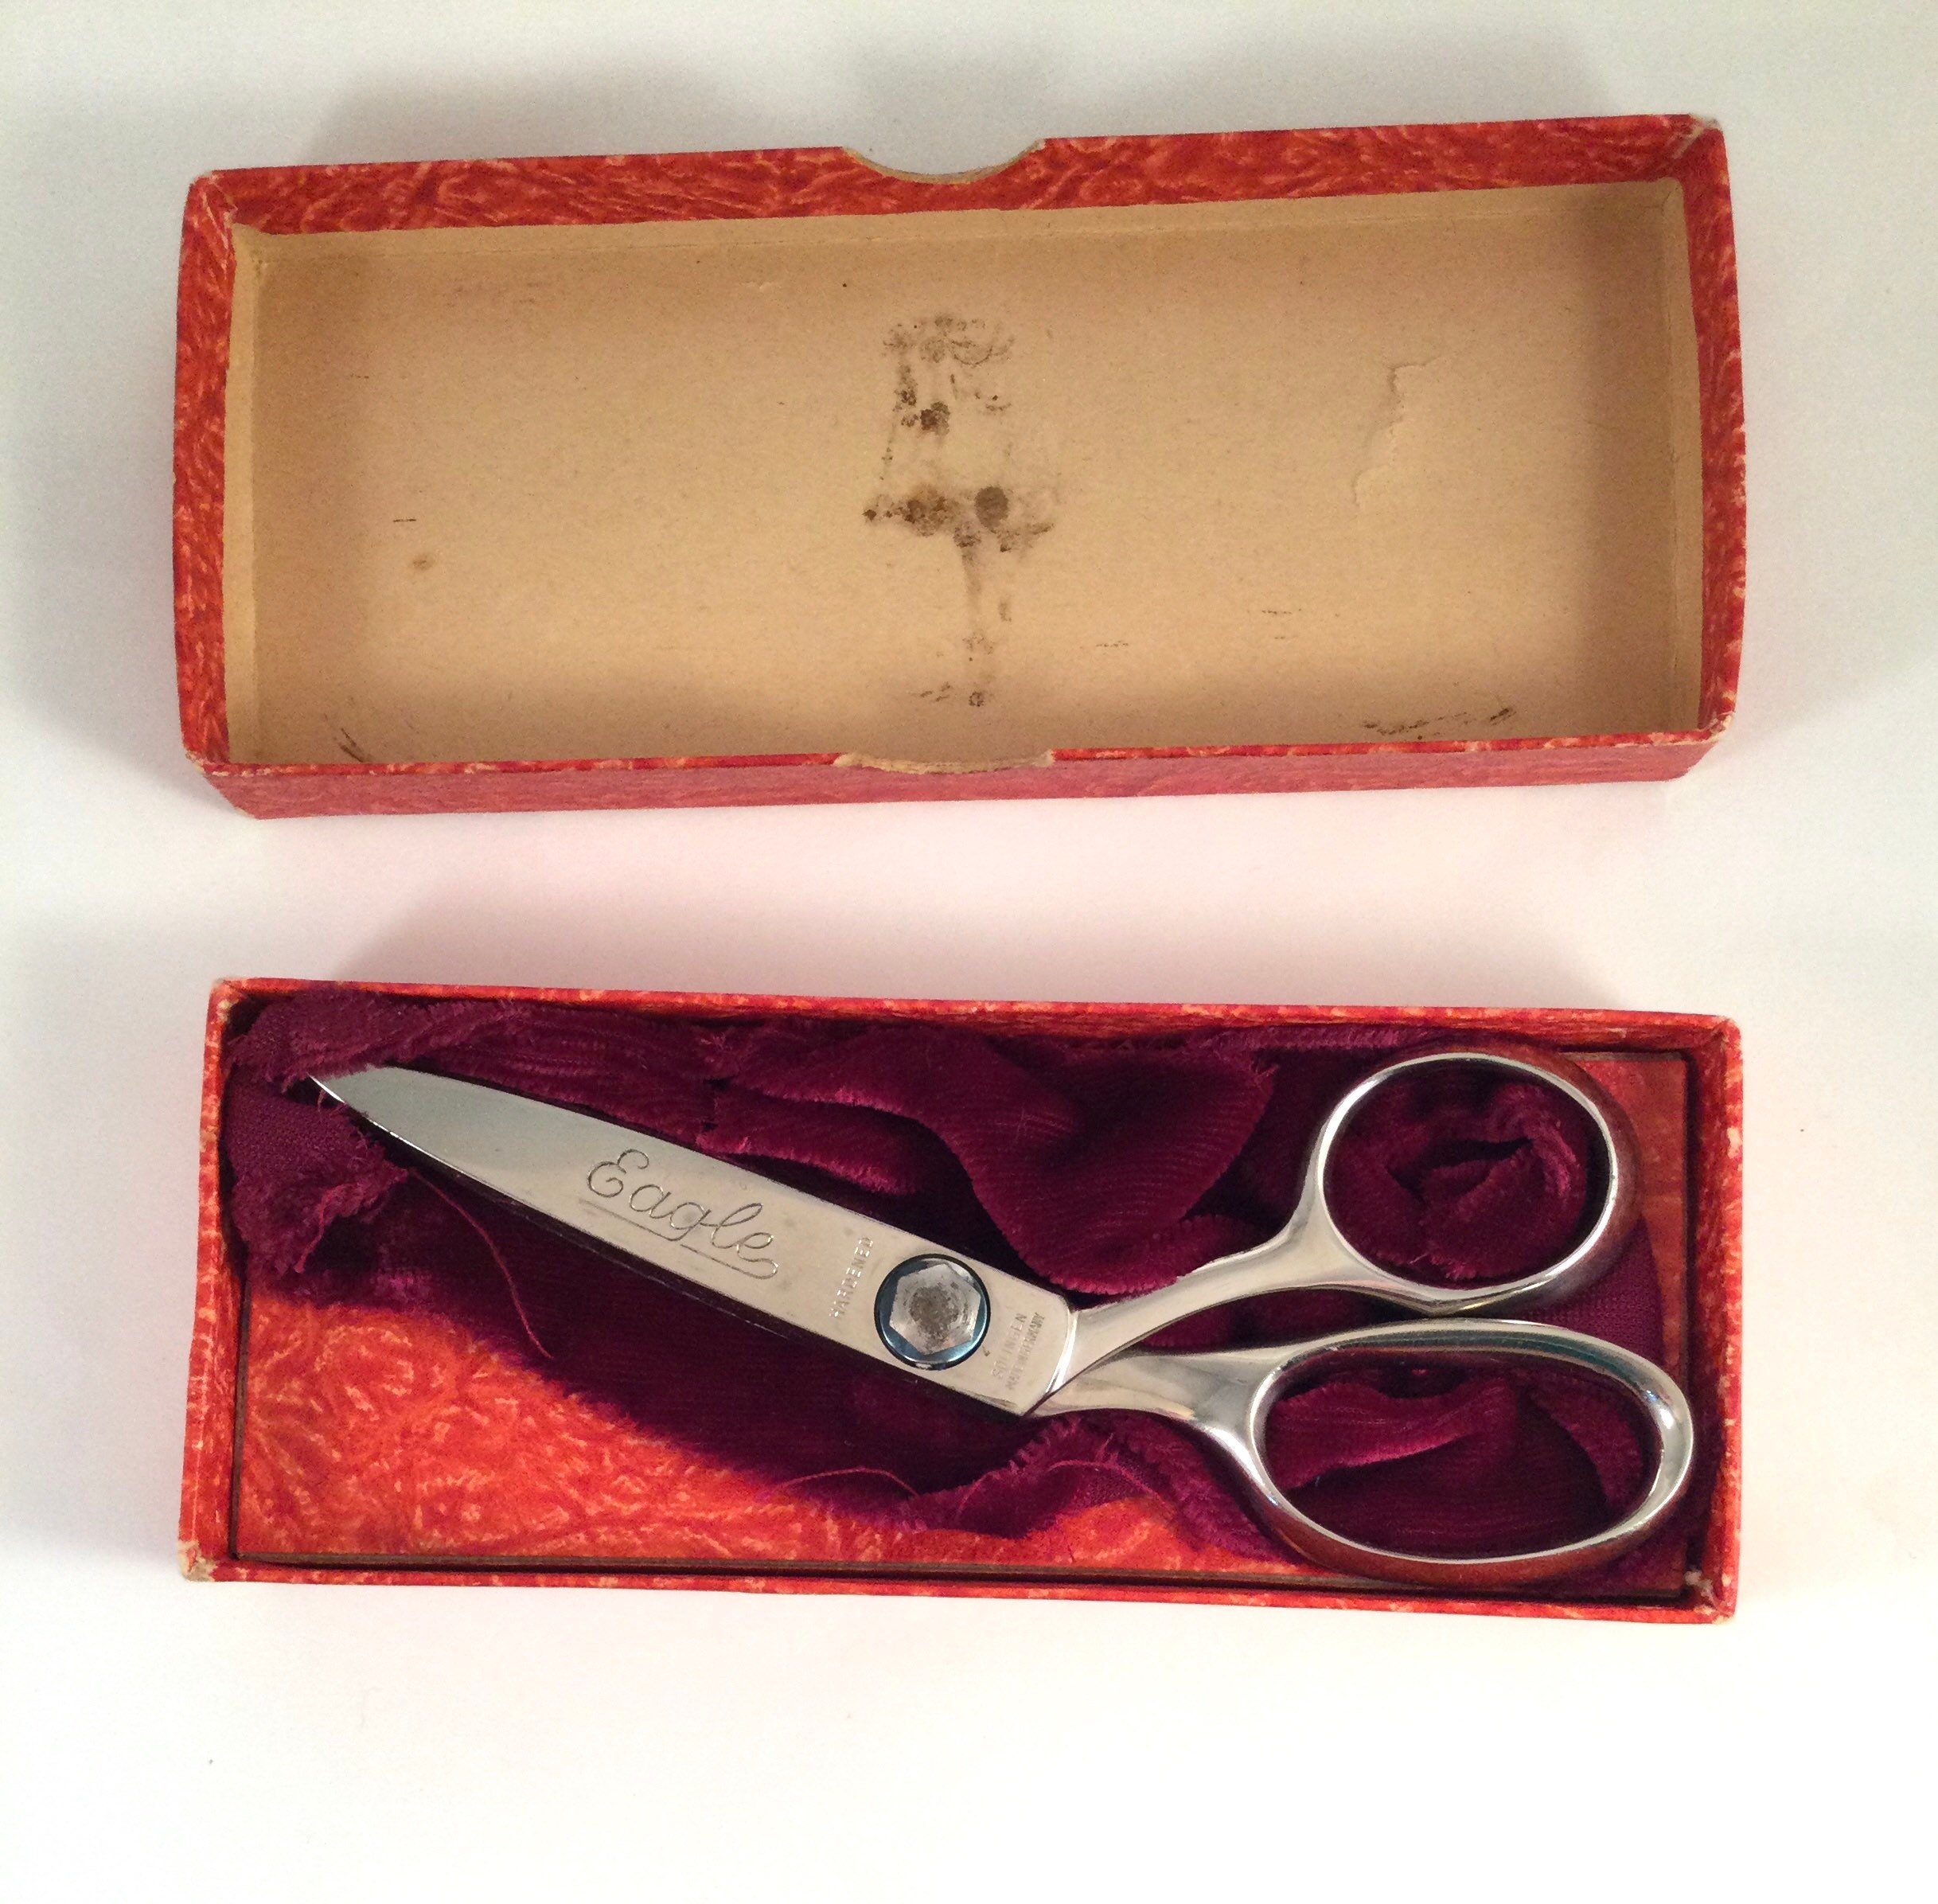 Woolworths Pinking Shears Zigzag Scissors Sewing Original Box Vtg 50s 